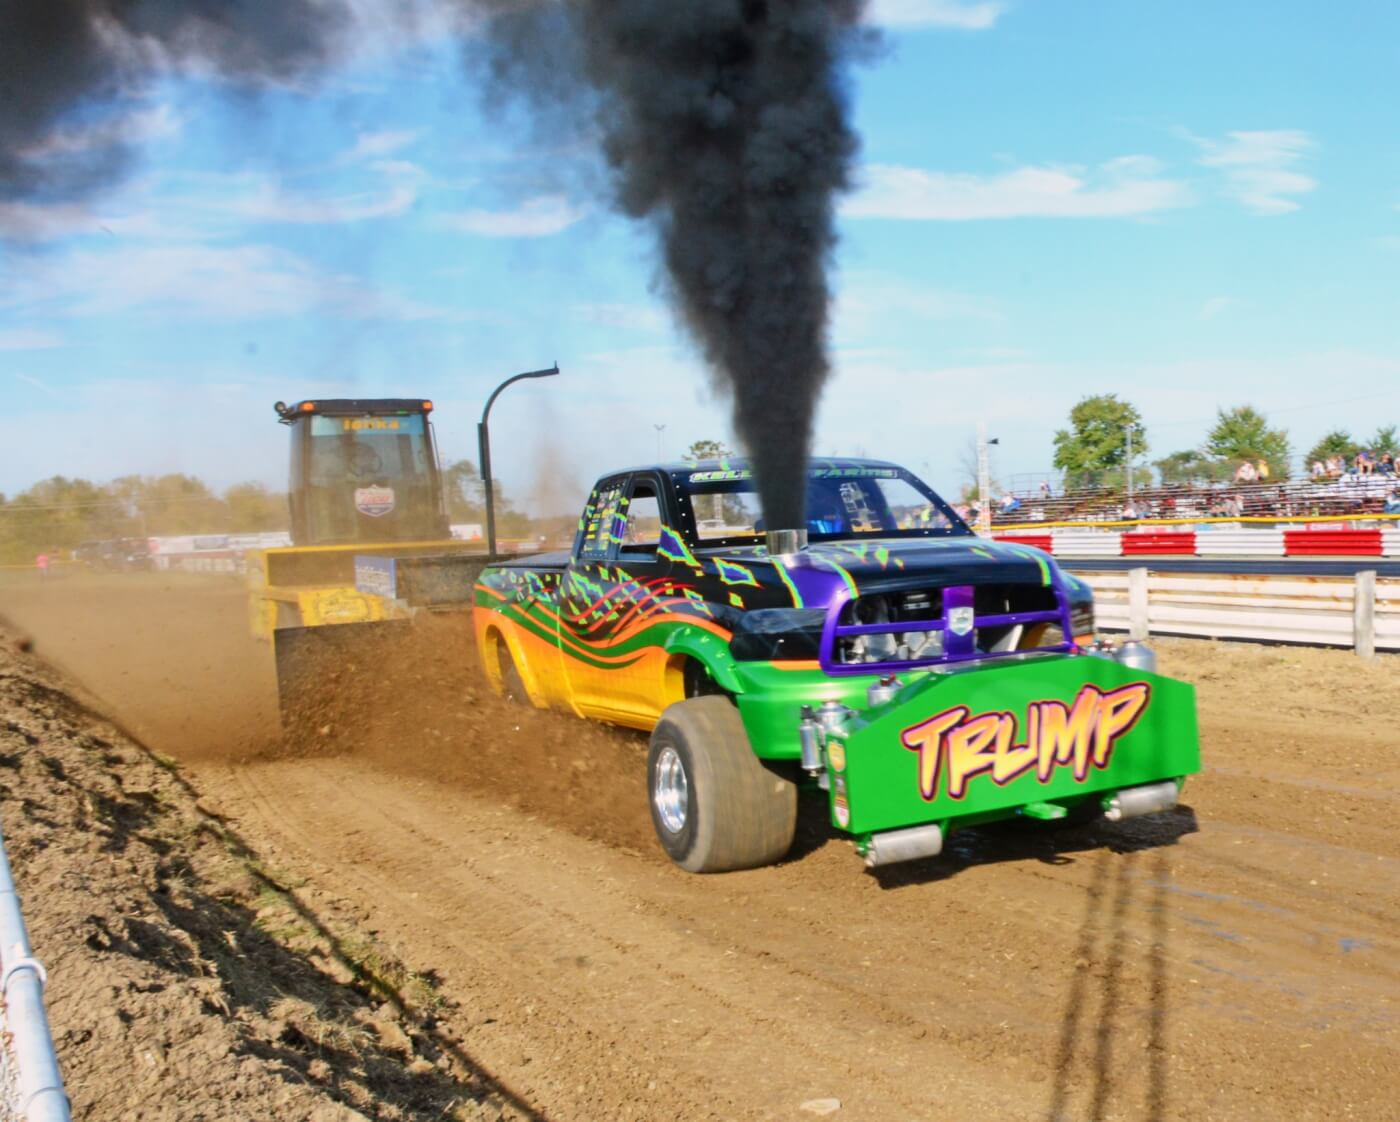 Shane Kellogg won top honors in the Modified Pulling cvlass. His “Trump Truck” pulled all the way to first place. 